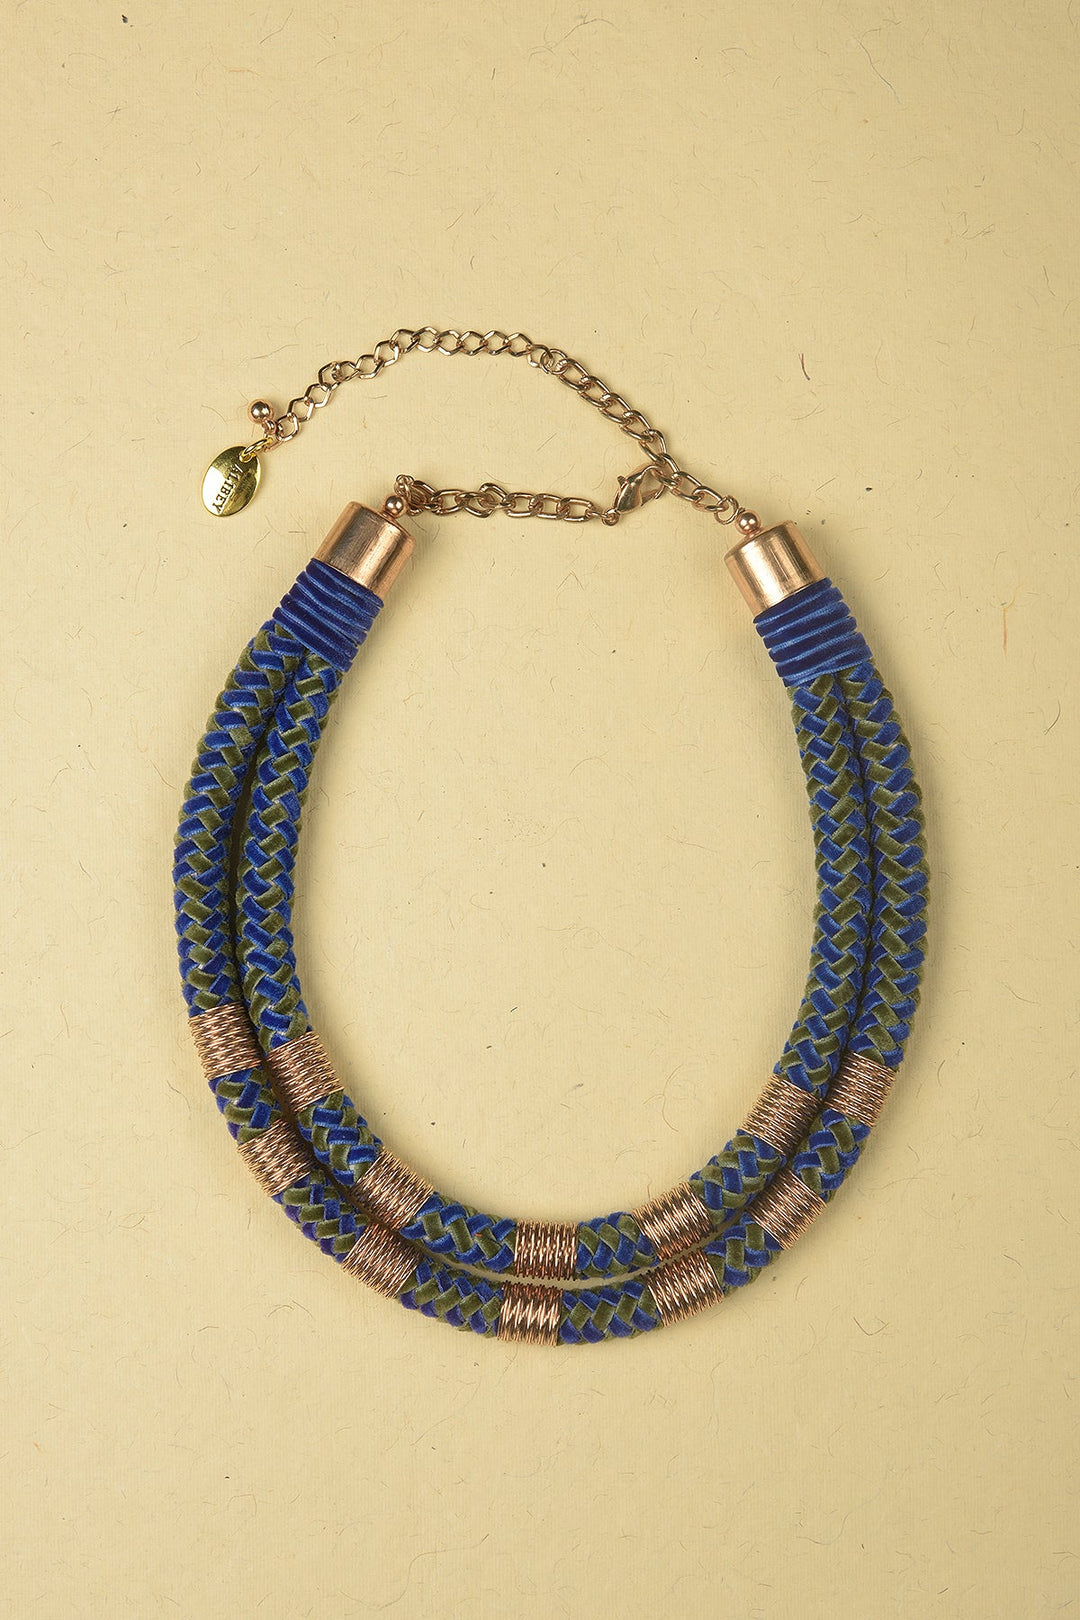 Blue & Dark Green Necklace made of Jute, Suede and Plated Iron Rings